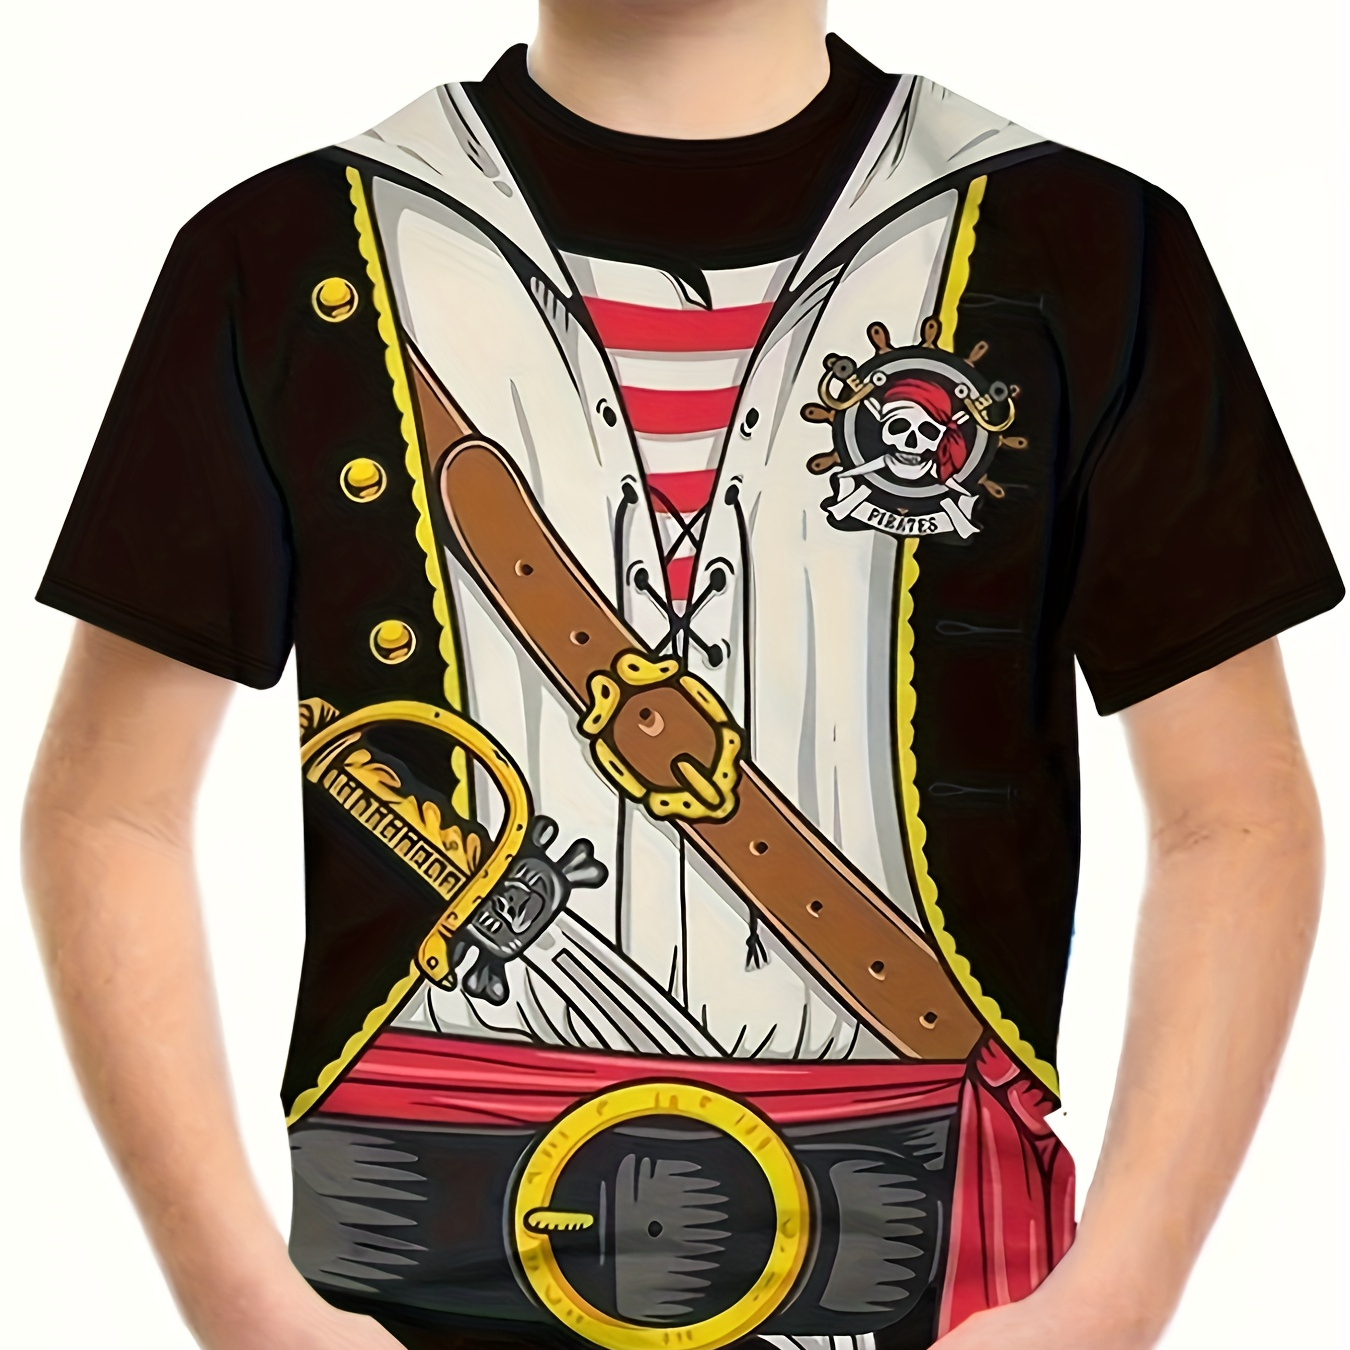 

Boys Pirate 3d Print Tee, Short Sleeve Crew Neck Top, Kids Novelty Clothes For Summer